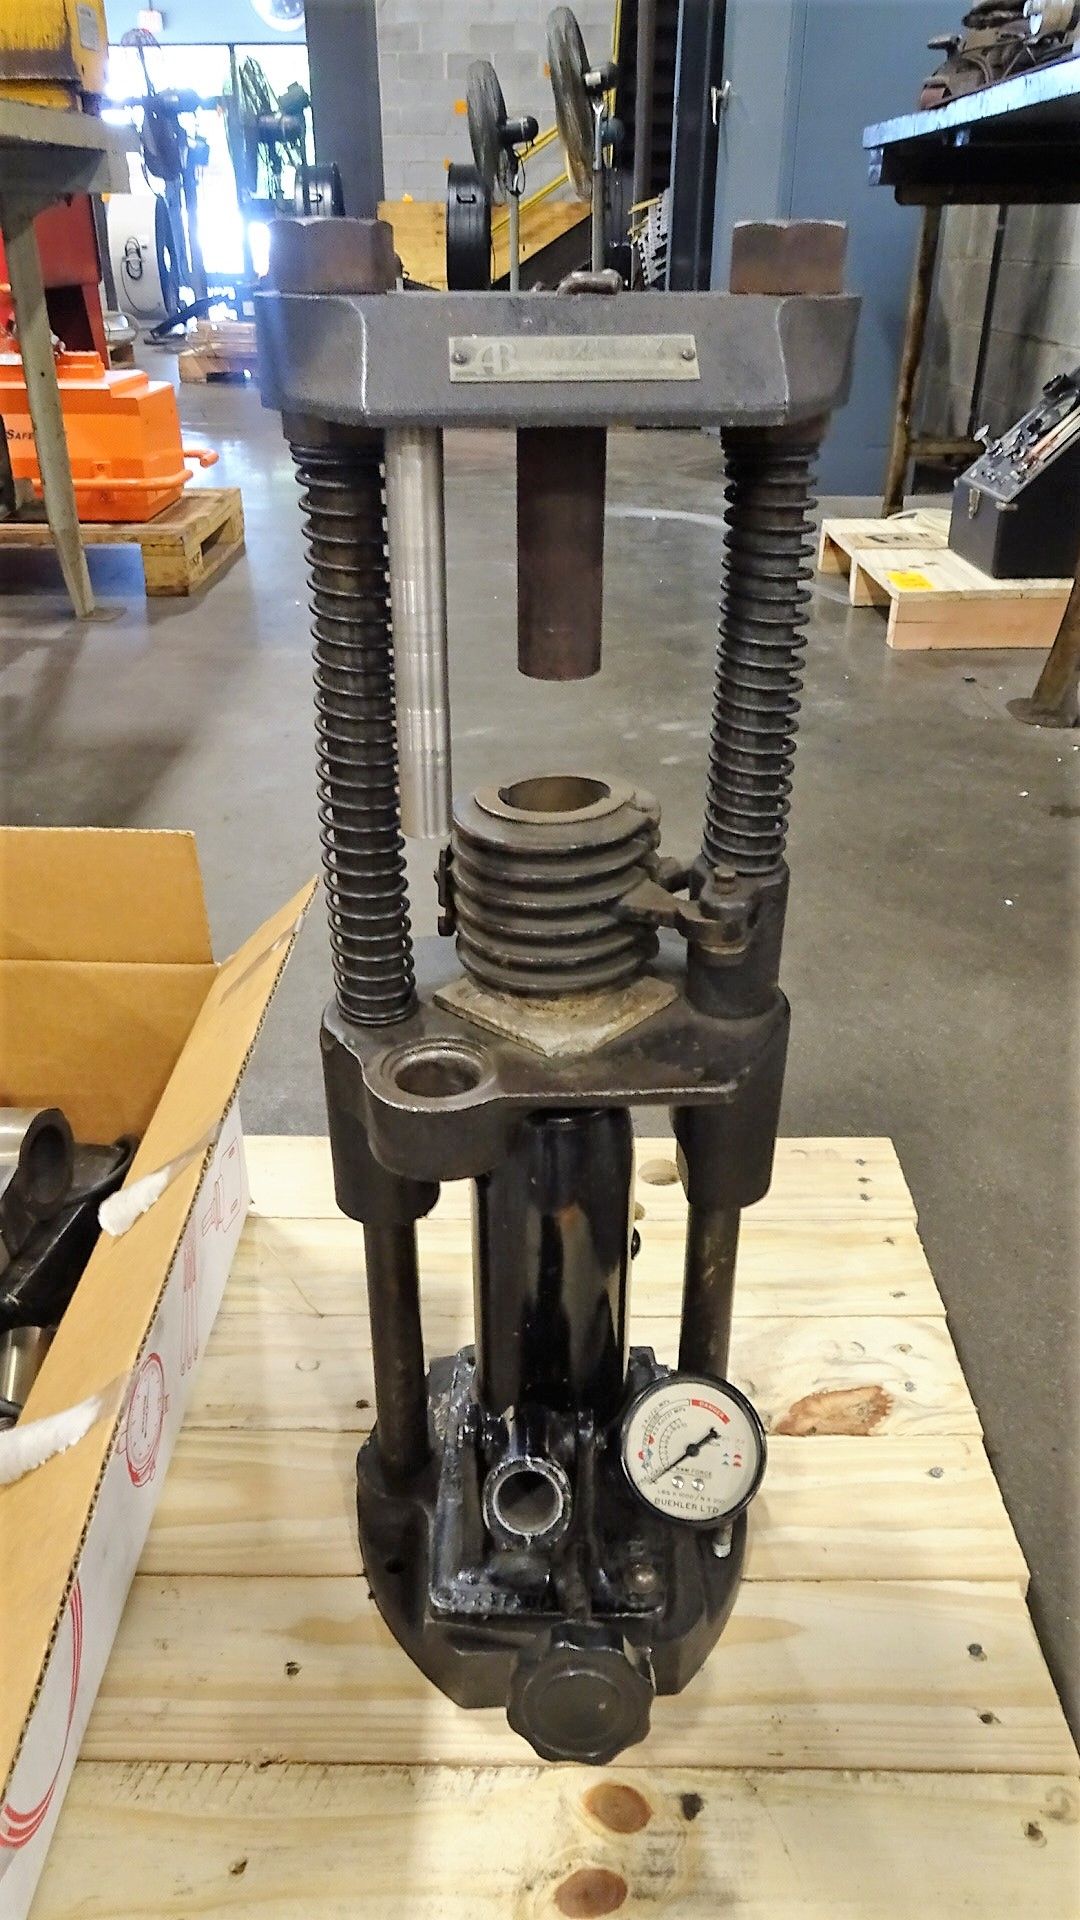 Buehler Mounting Press with Associated Press Parts & Buehler Heating Coils